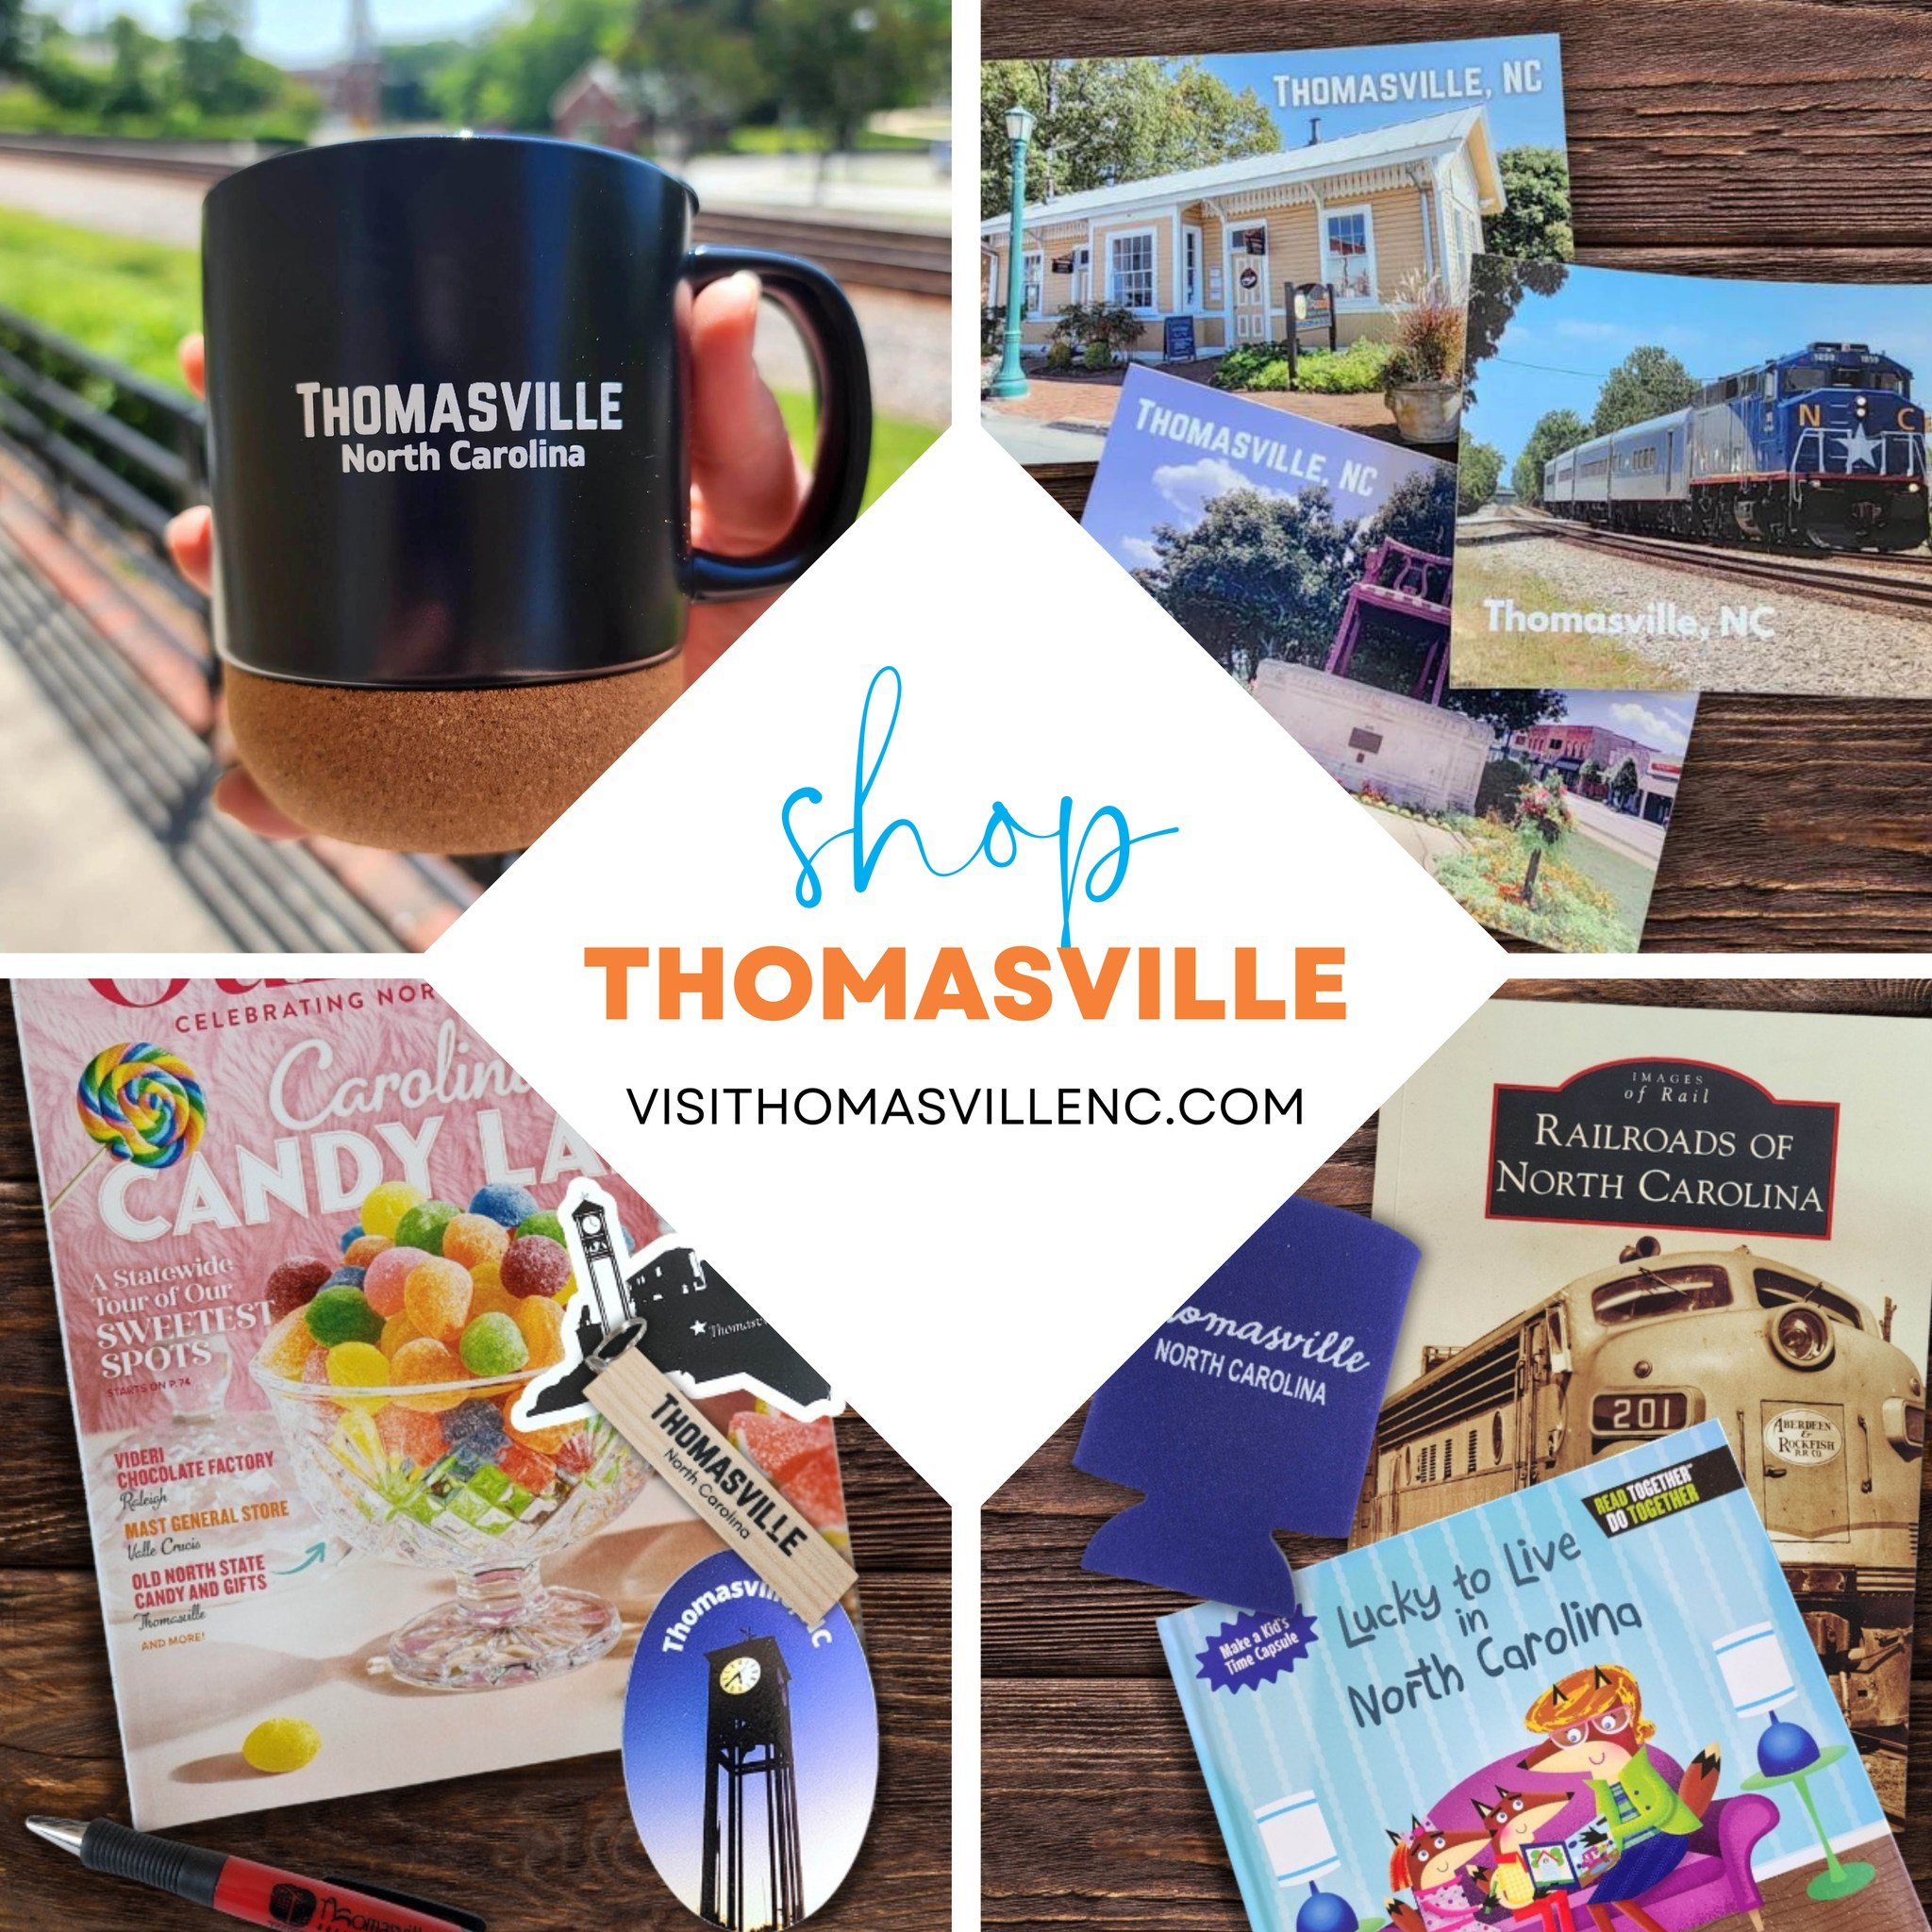 Shop Thomasville Souvenirs! We have a collection of local books, mugs, magazines, koozies, t-shirts, and much more! Be sure to check out our website here: https://thomasville-nc-tourism.myshopify.com/
.
.
.
#thomasville #thomasvillenctourism #thomasv